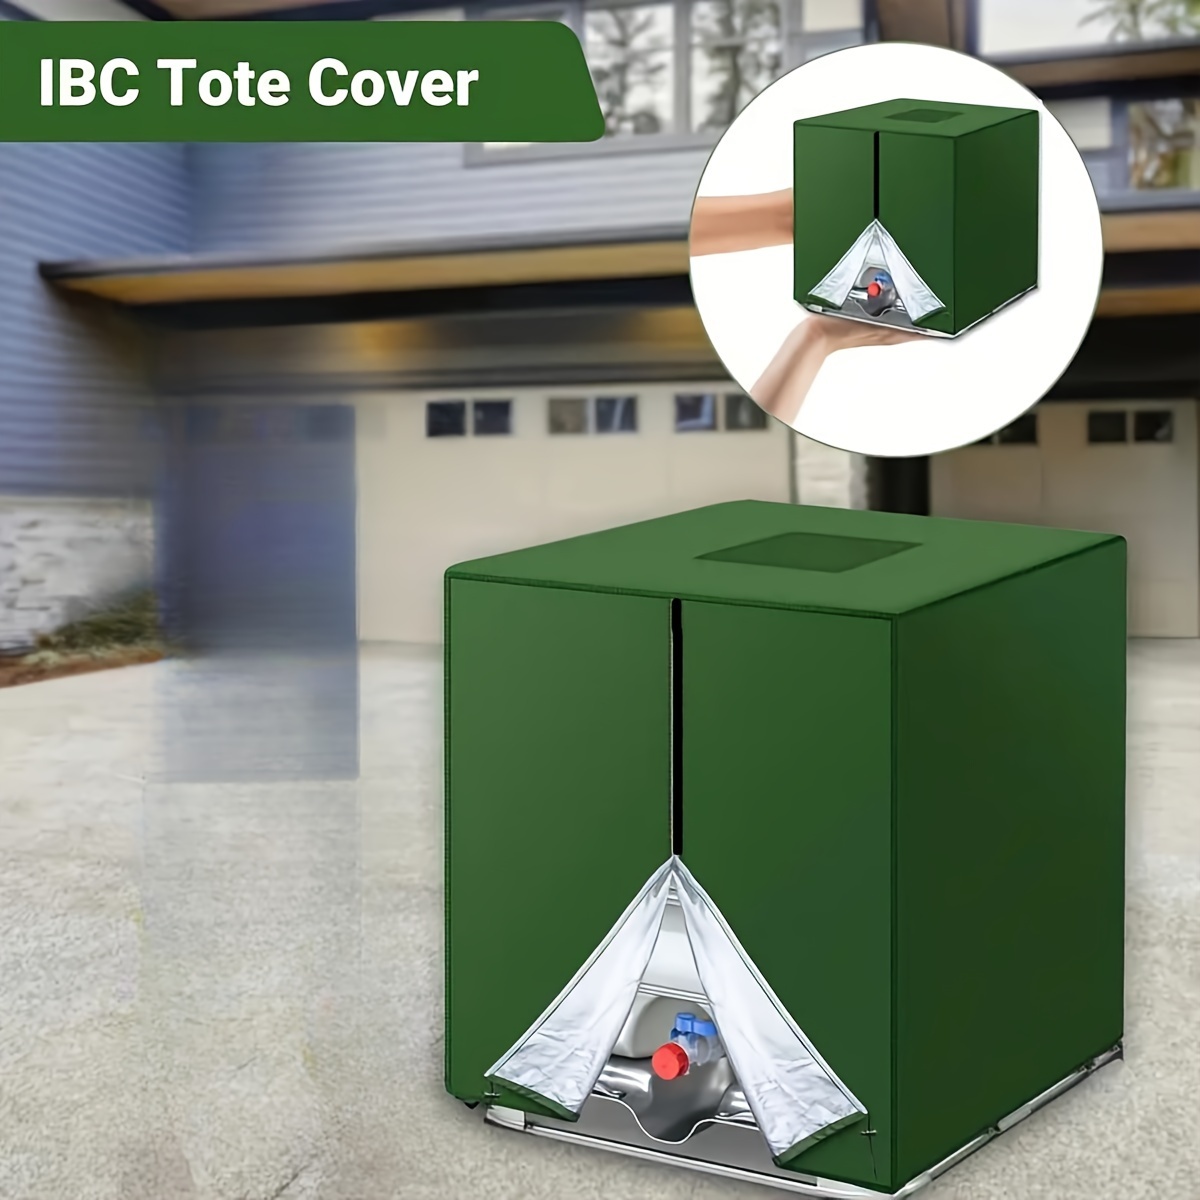 

Waterproof Sun Protection Cover For Outdoor Water Tank, Ibc Ton Barrel Green Cover, Fits 1000l Size - Garden Tools & Lawn Care Accessory, 1pc